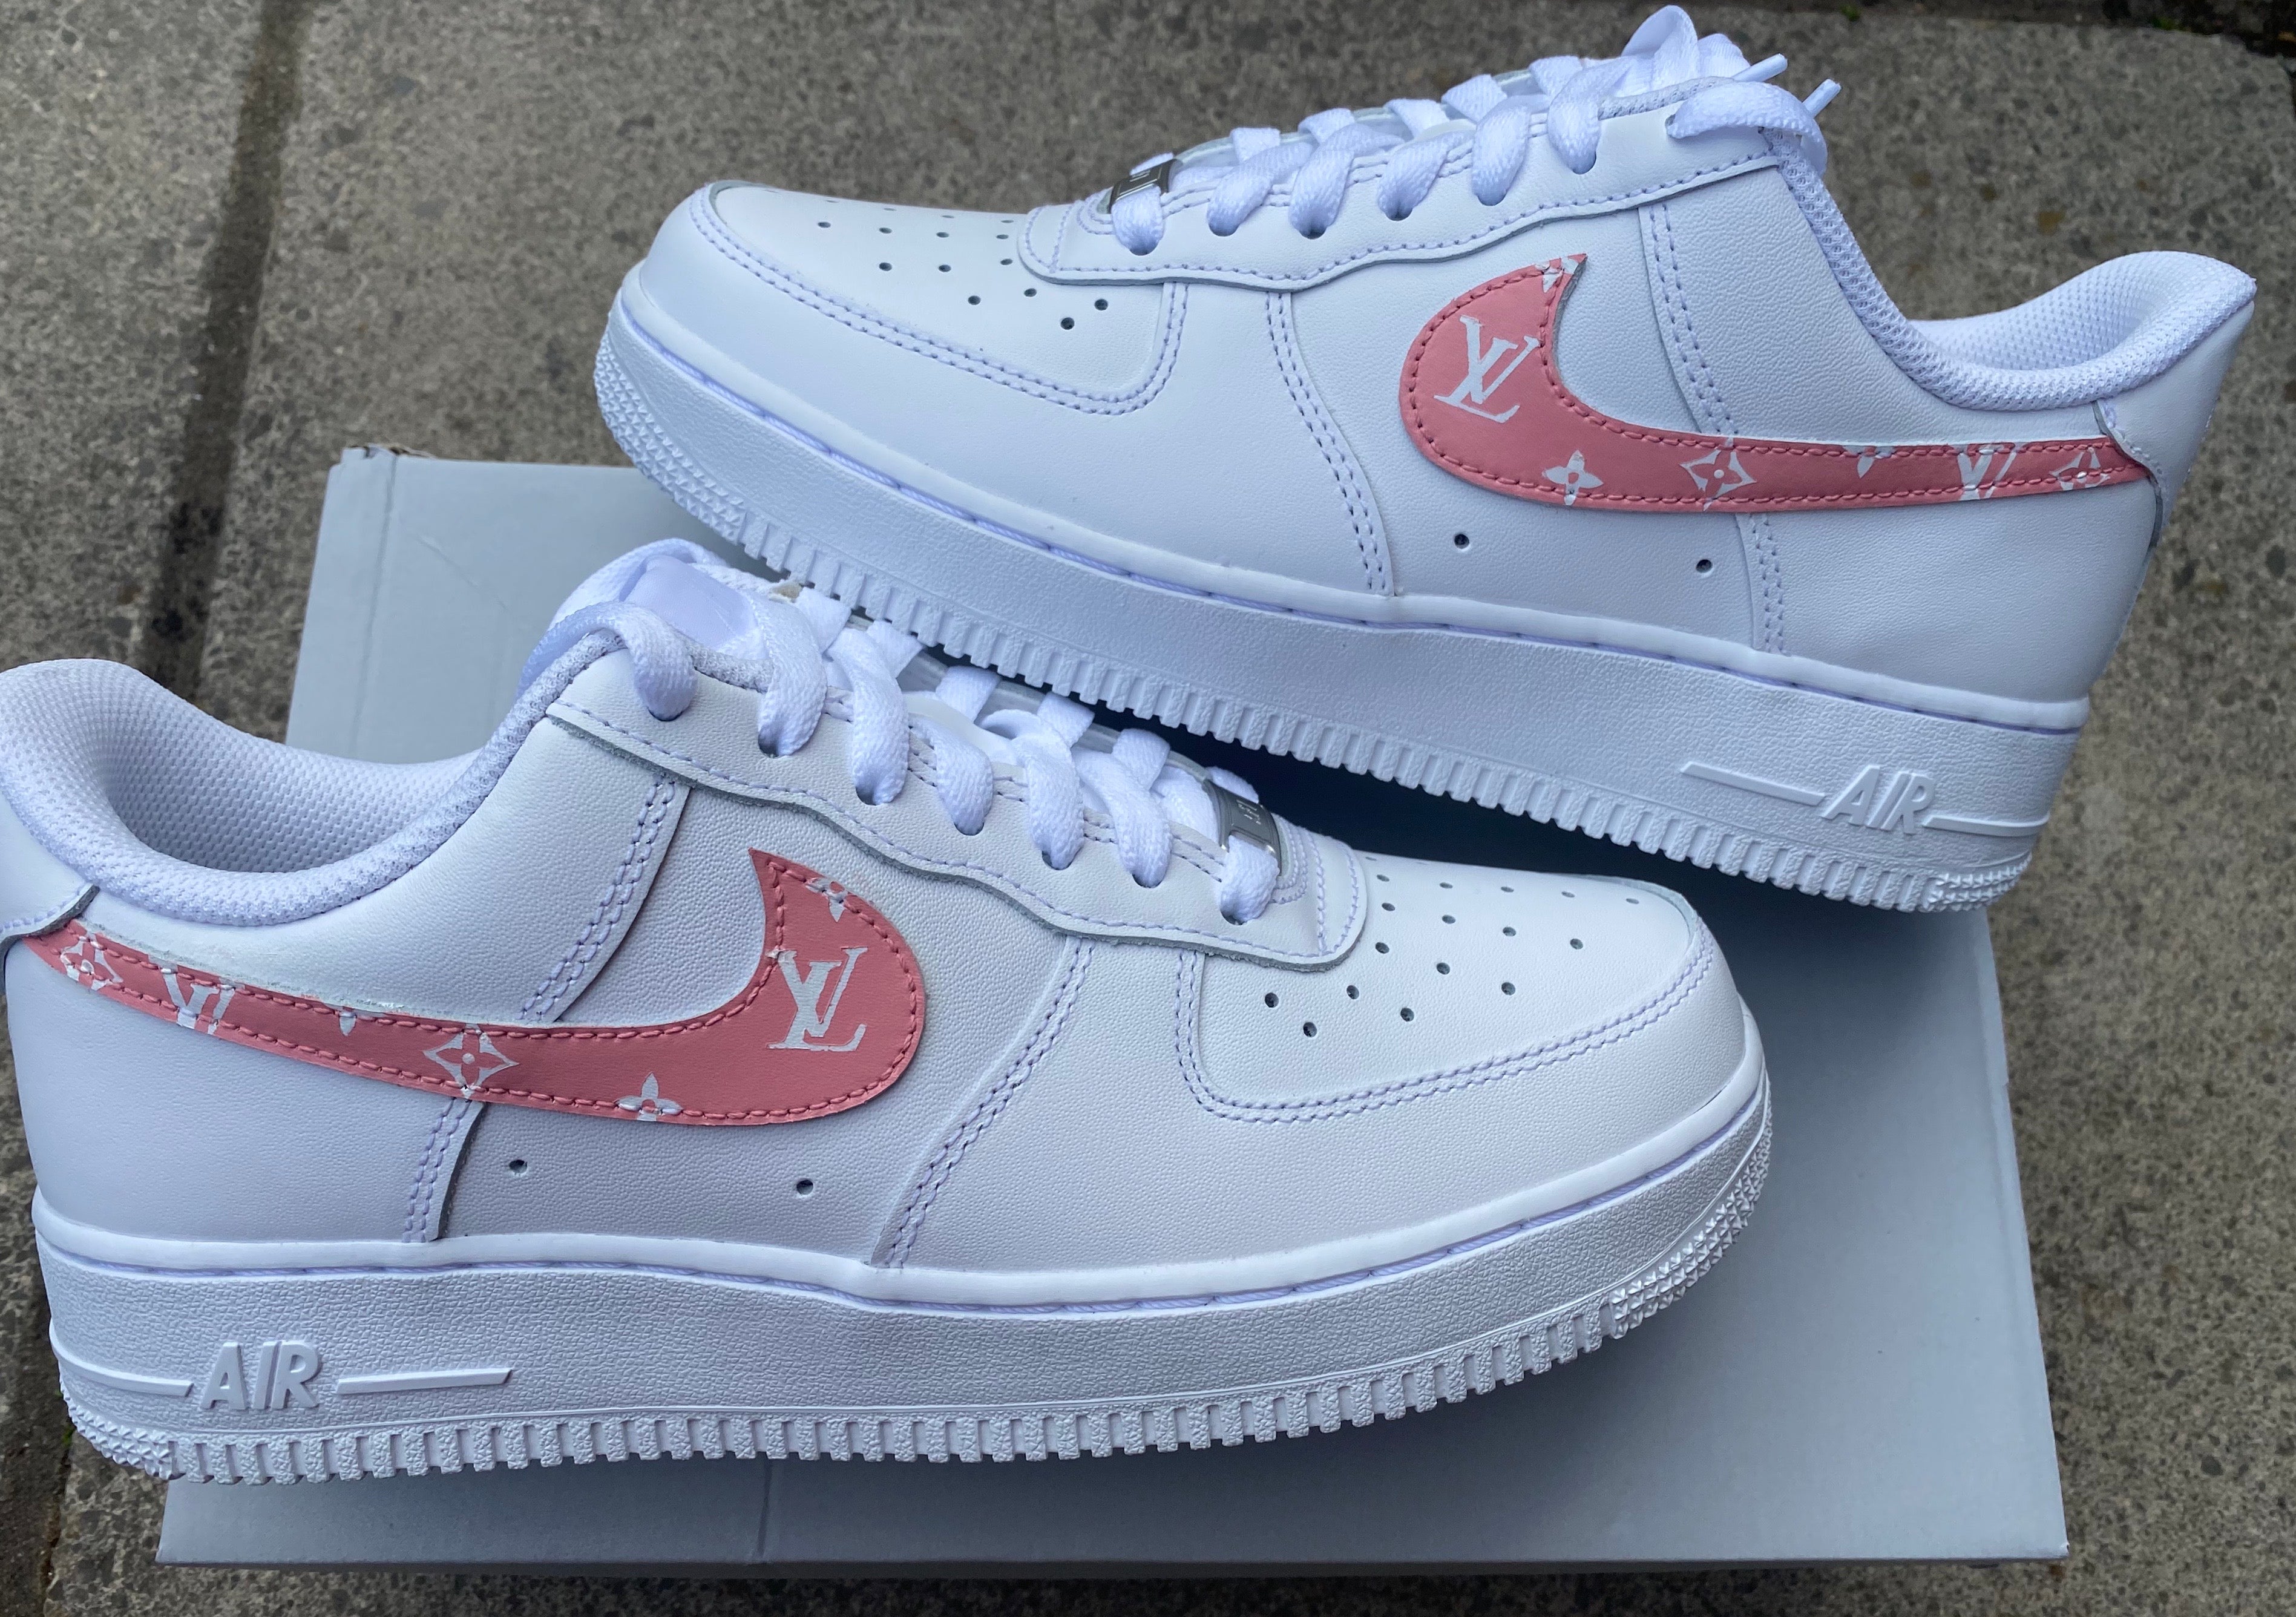 Red pattern drip AF1 customs – Apollo Apparel